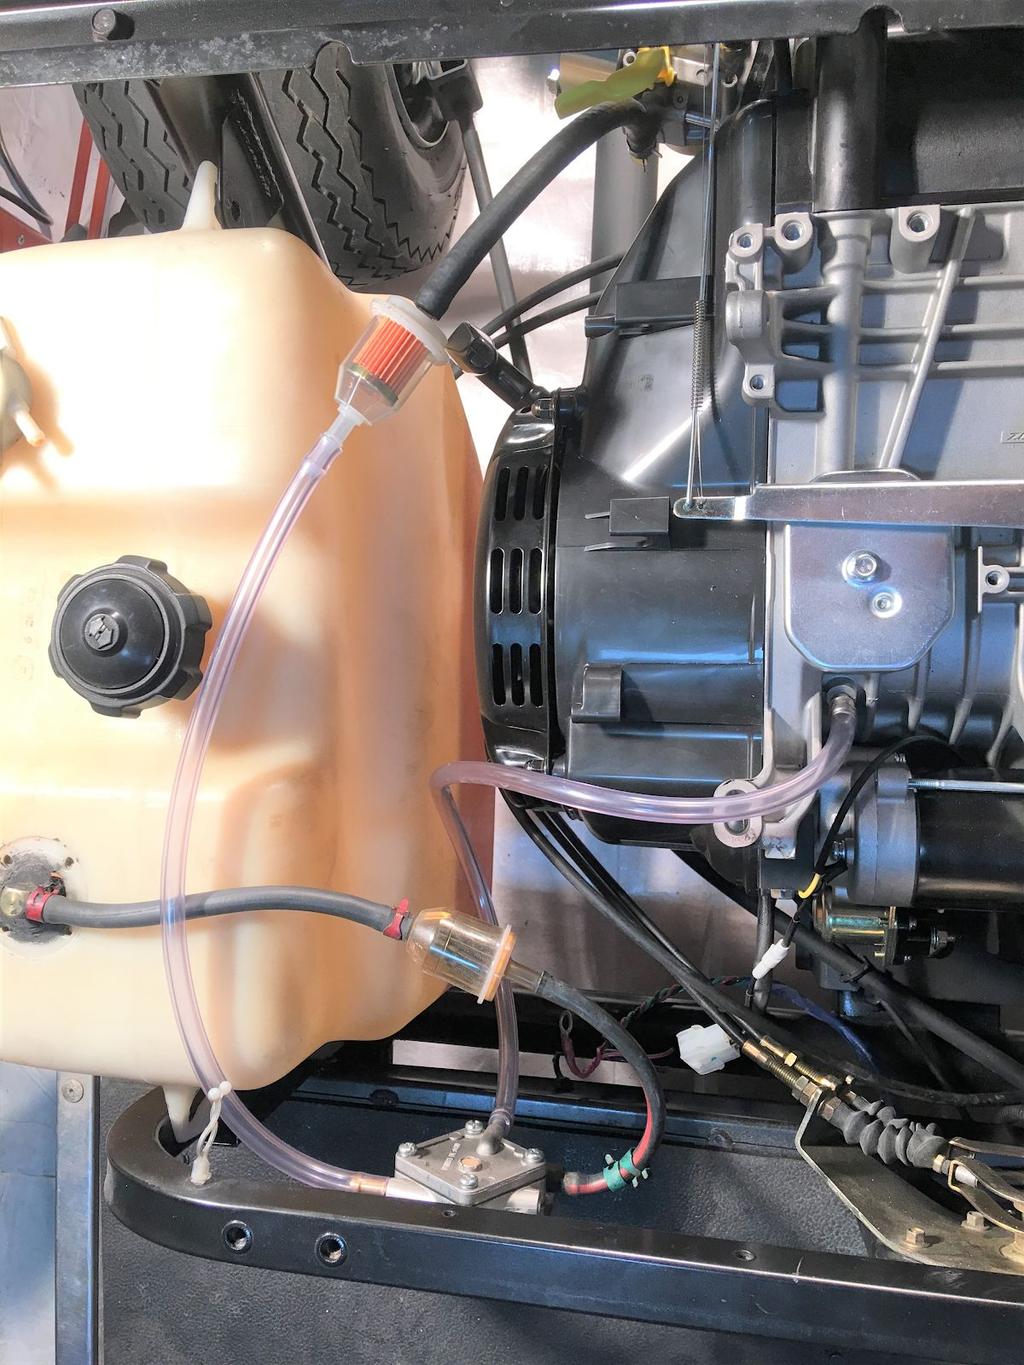 When setting up your fuel system, make sure the yellow vent screen on the fuel pump is pointed upwards. Use the clear fuel line provided to plumb the fuel system as shown below.